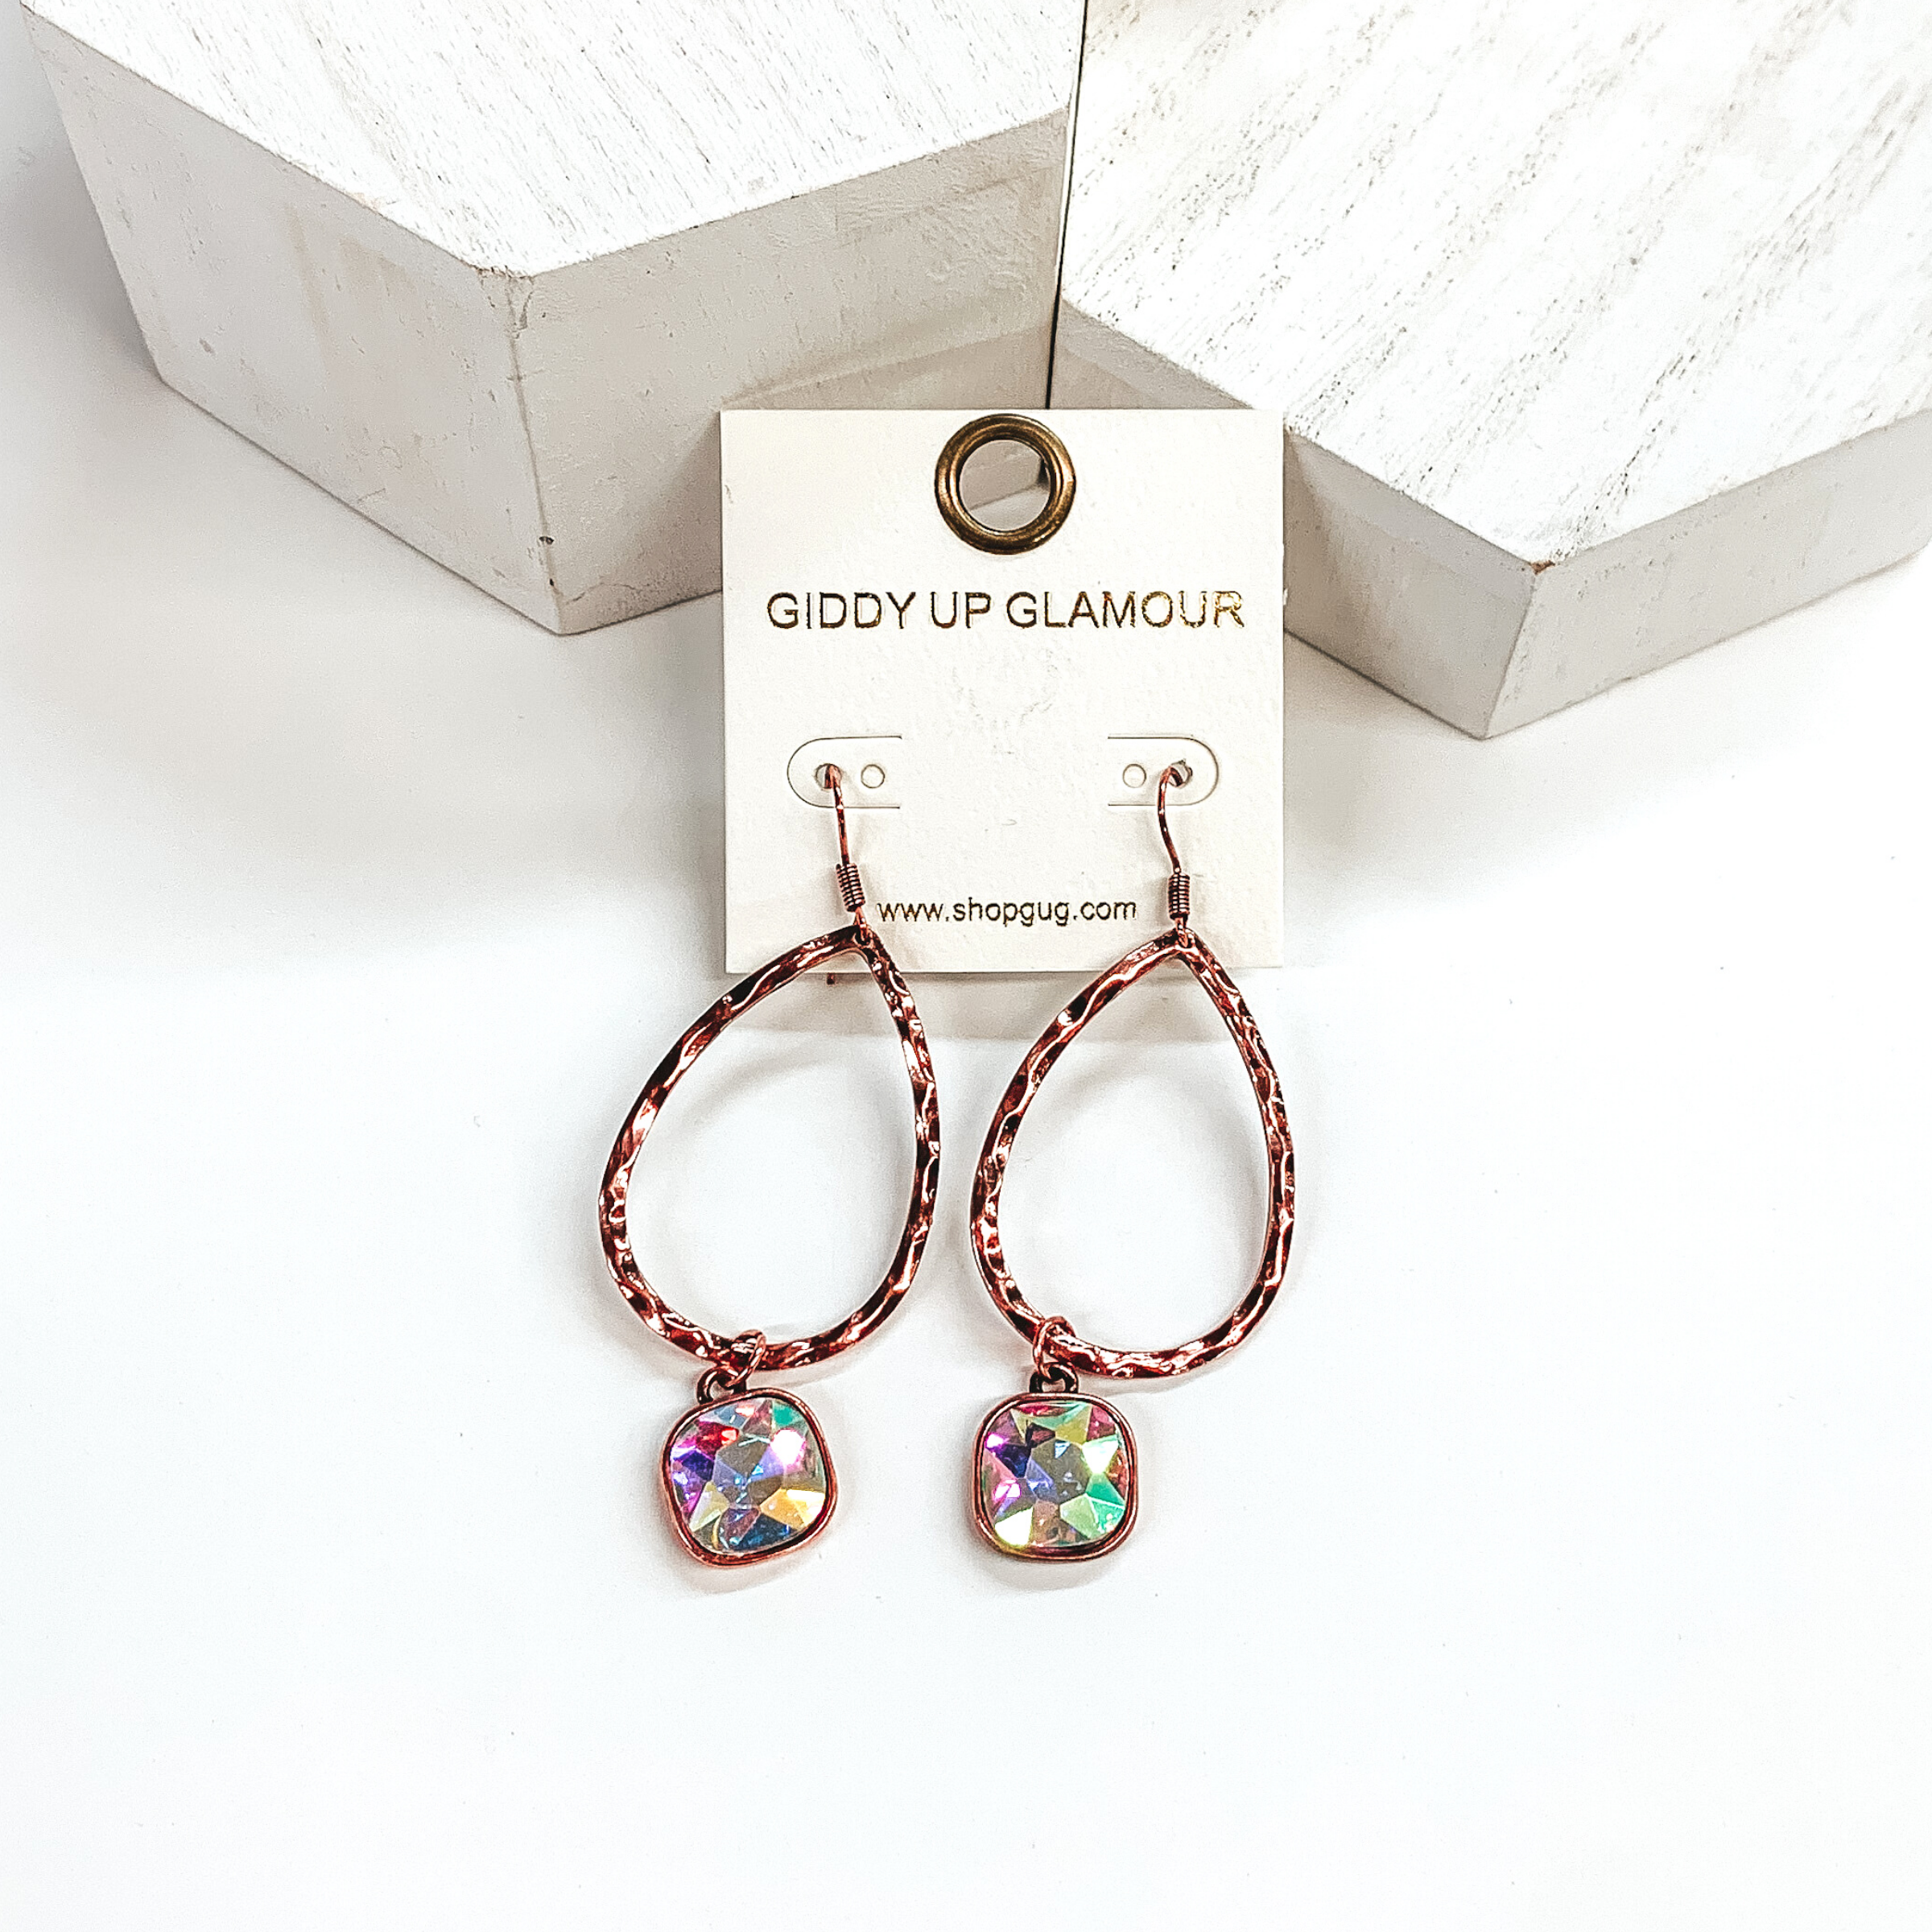 Copper teardrop hammered earrings with a hanging cushion cut ab crystal. These earrings are pictured on a white background with white blocks at the top of the picture. 